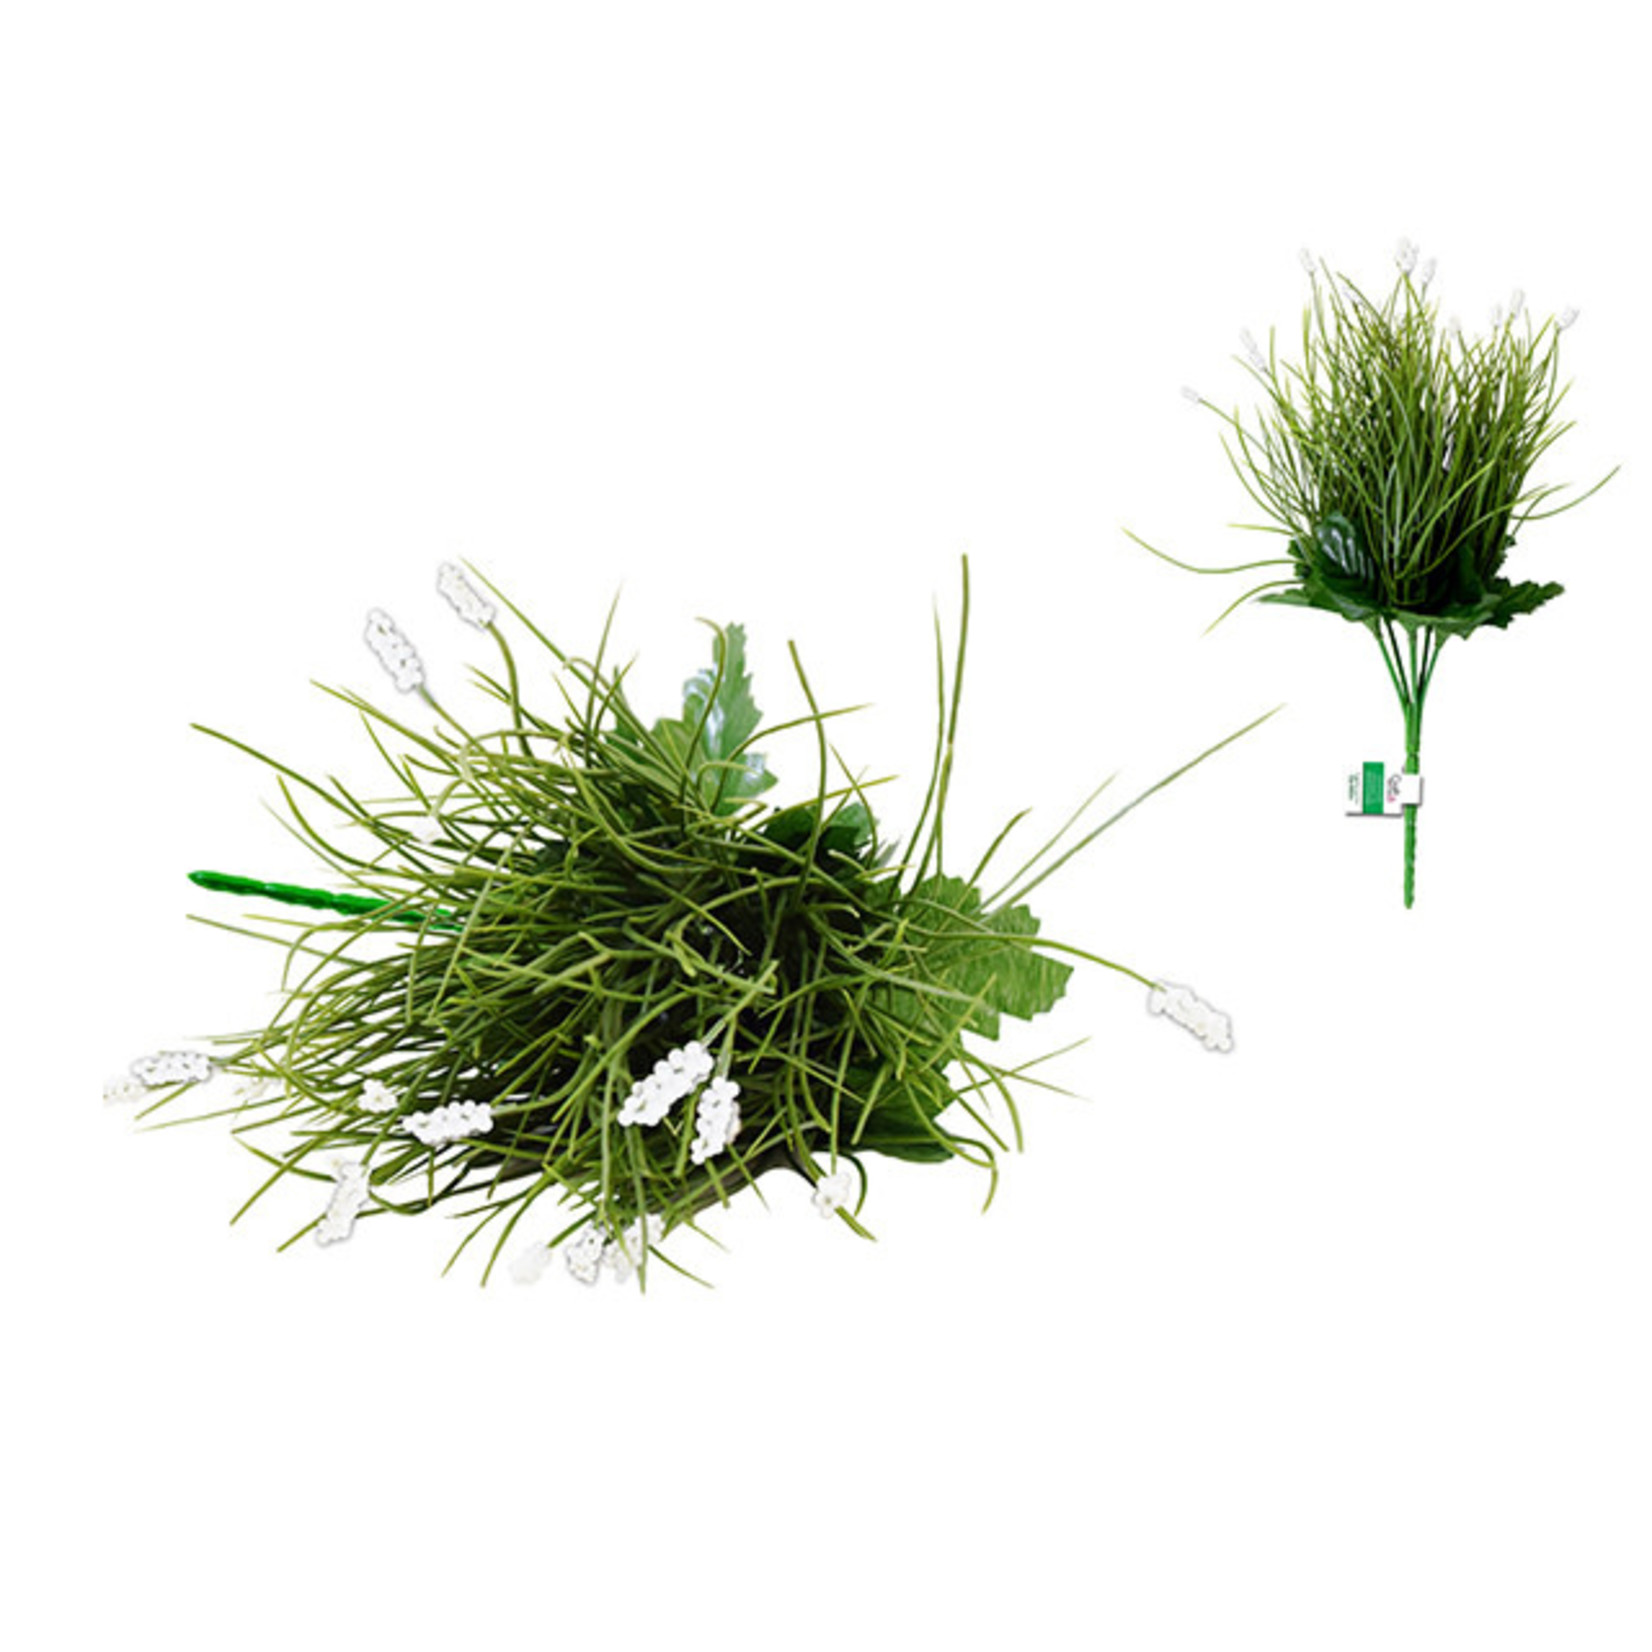 12.6IN GRASS BUSH WITH BABY'S BREATH TIPS A) SAGE GREEN